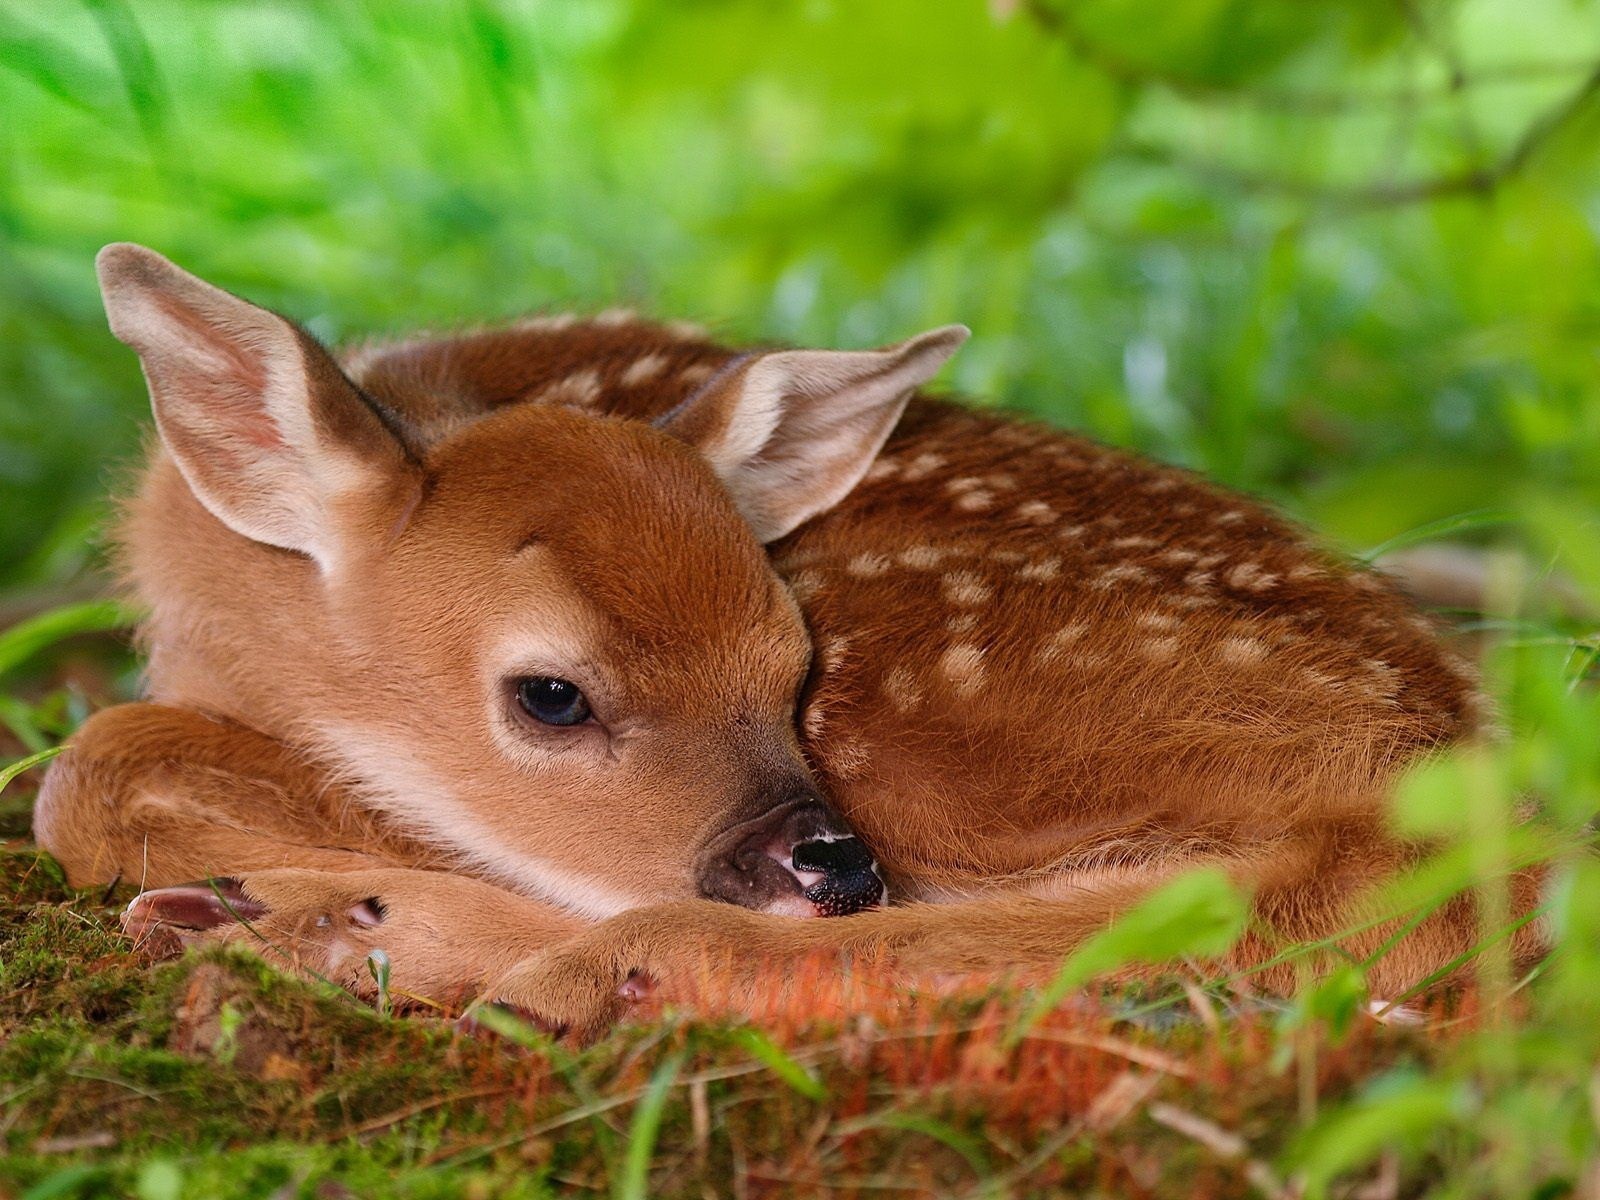 Wallpaper Deer Fawn White Tailed Red Baby